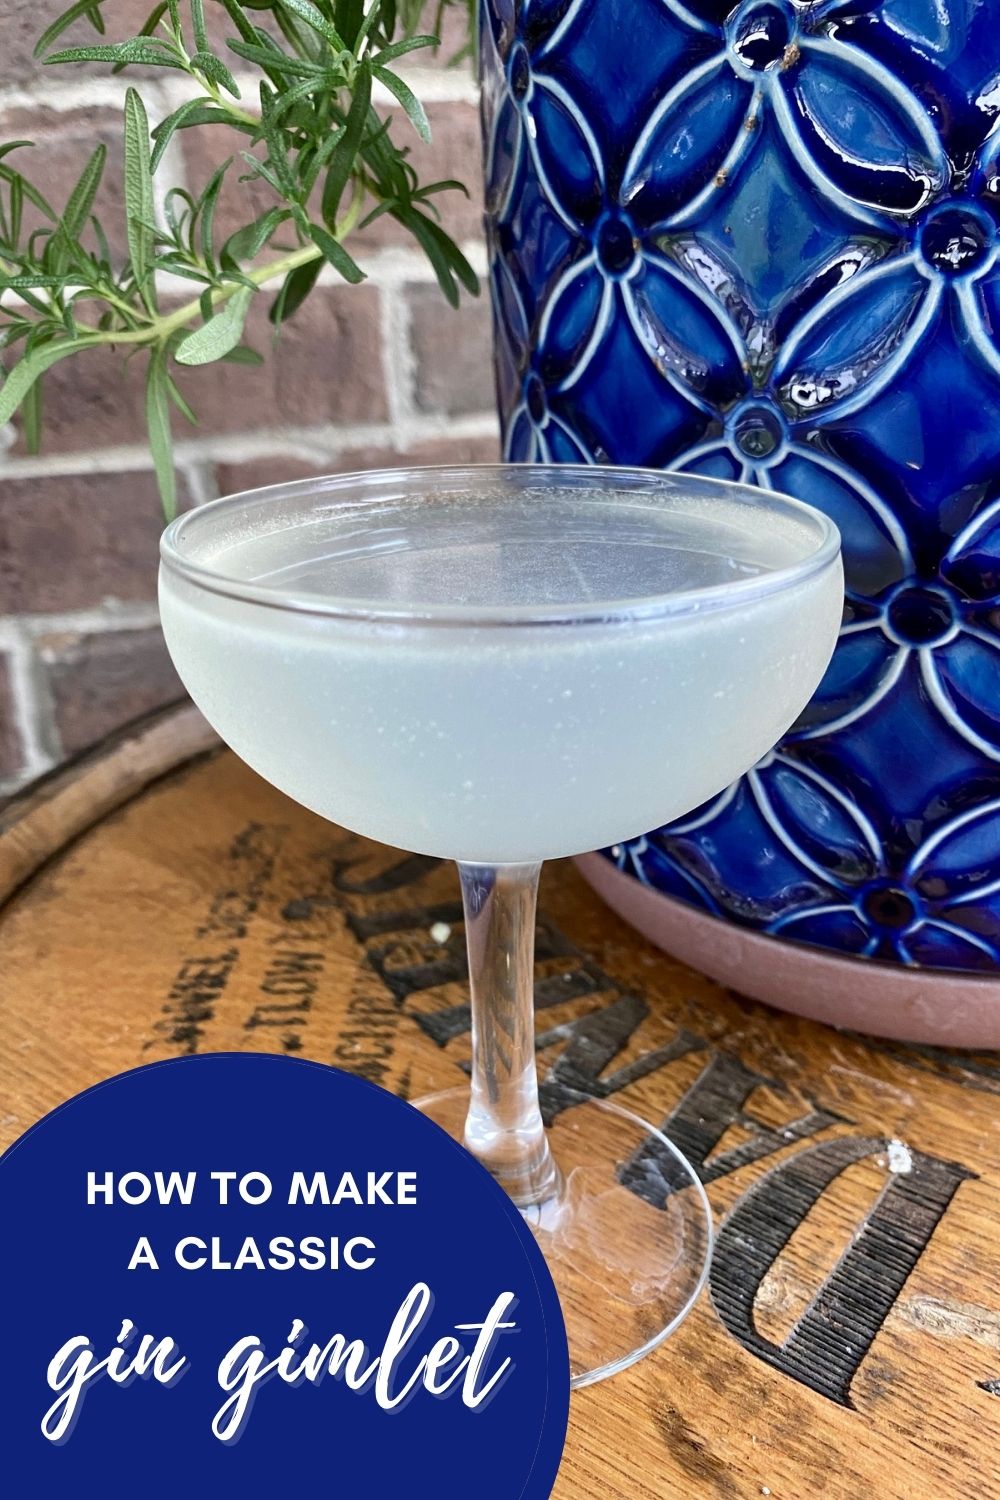 An Easy 3-Ingredient Gin Gimlet Cocktail | The classic gin gimlet cocktail is a must-have in your recipe repertoire. An easy gin cocktail recipe, just lime juice, gin, and simple syrup, and two minutes is all you need. Best cocktail recipes ever! #gin #gimlet #cocktail #drinkrecipe